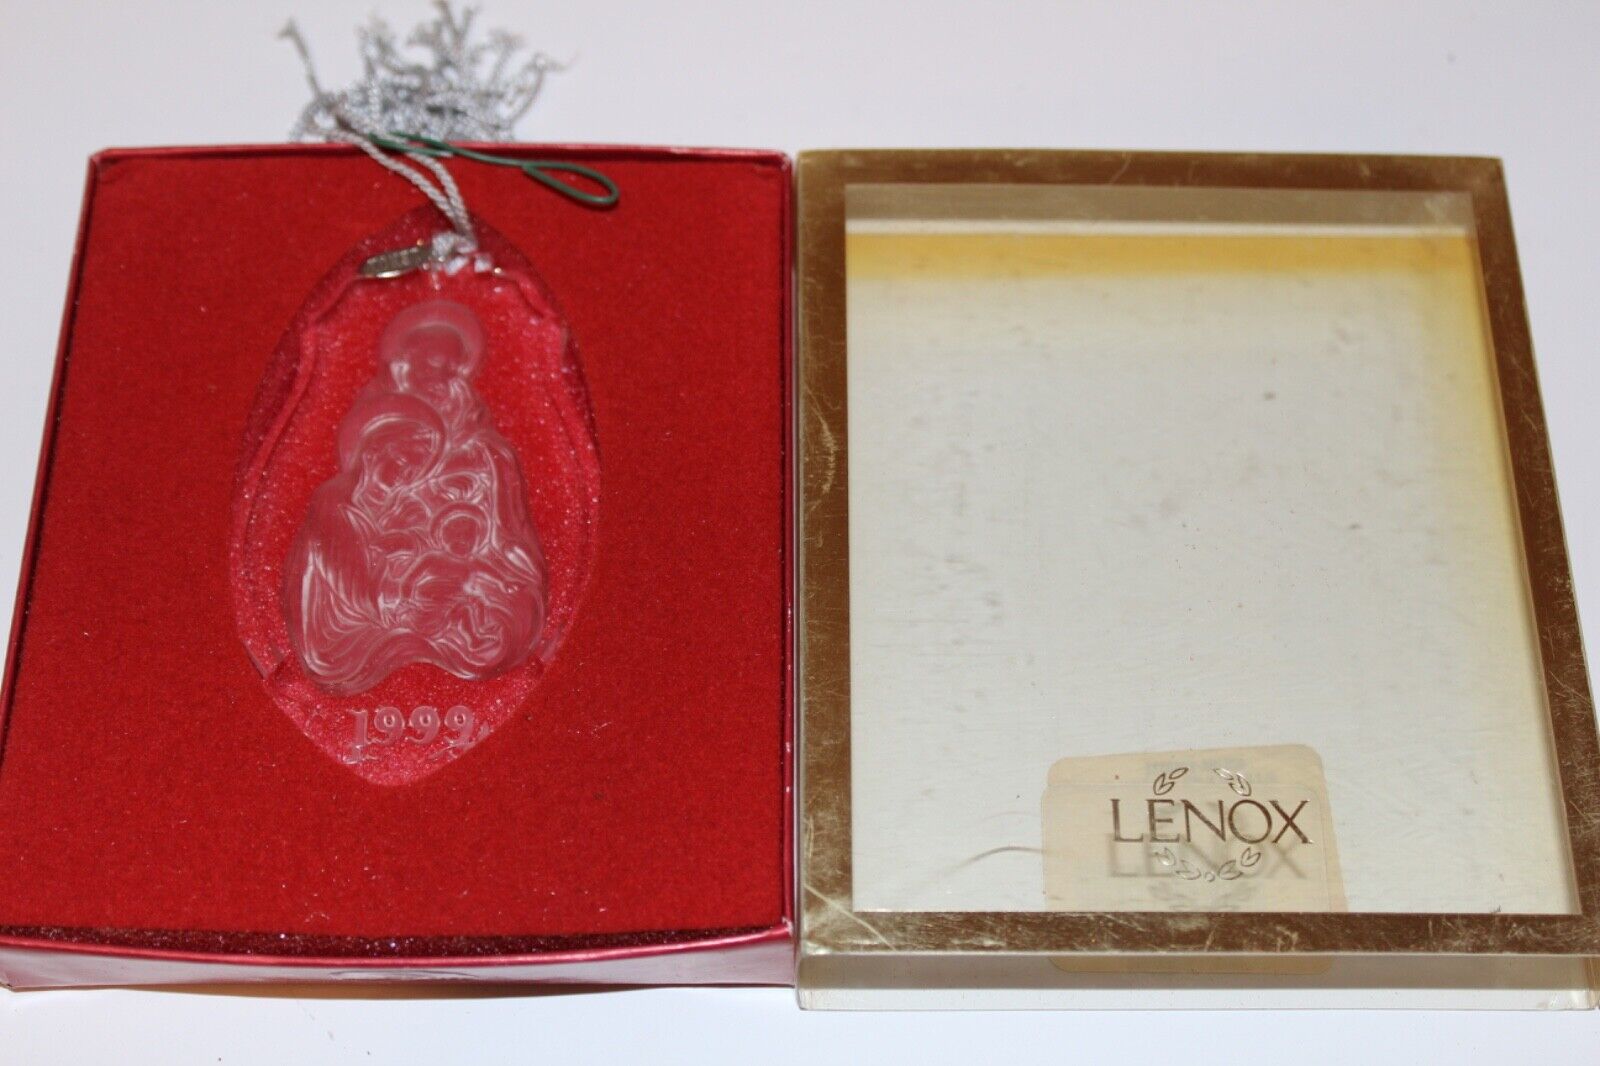 Lenox Crystal Ornament 1999 Holy Family Ornament  Made in Germany Original Box